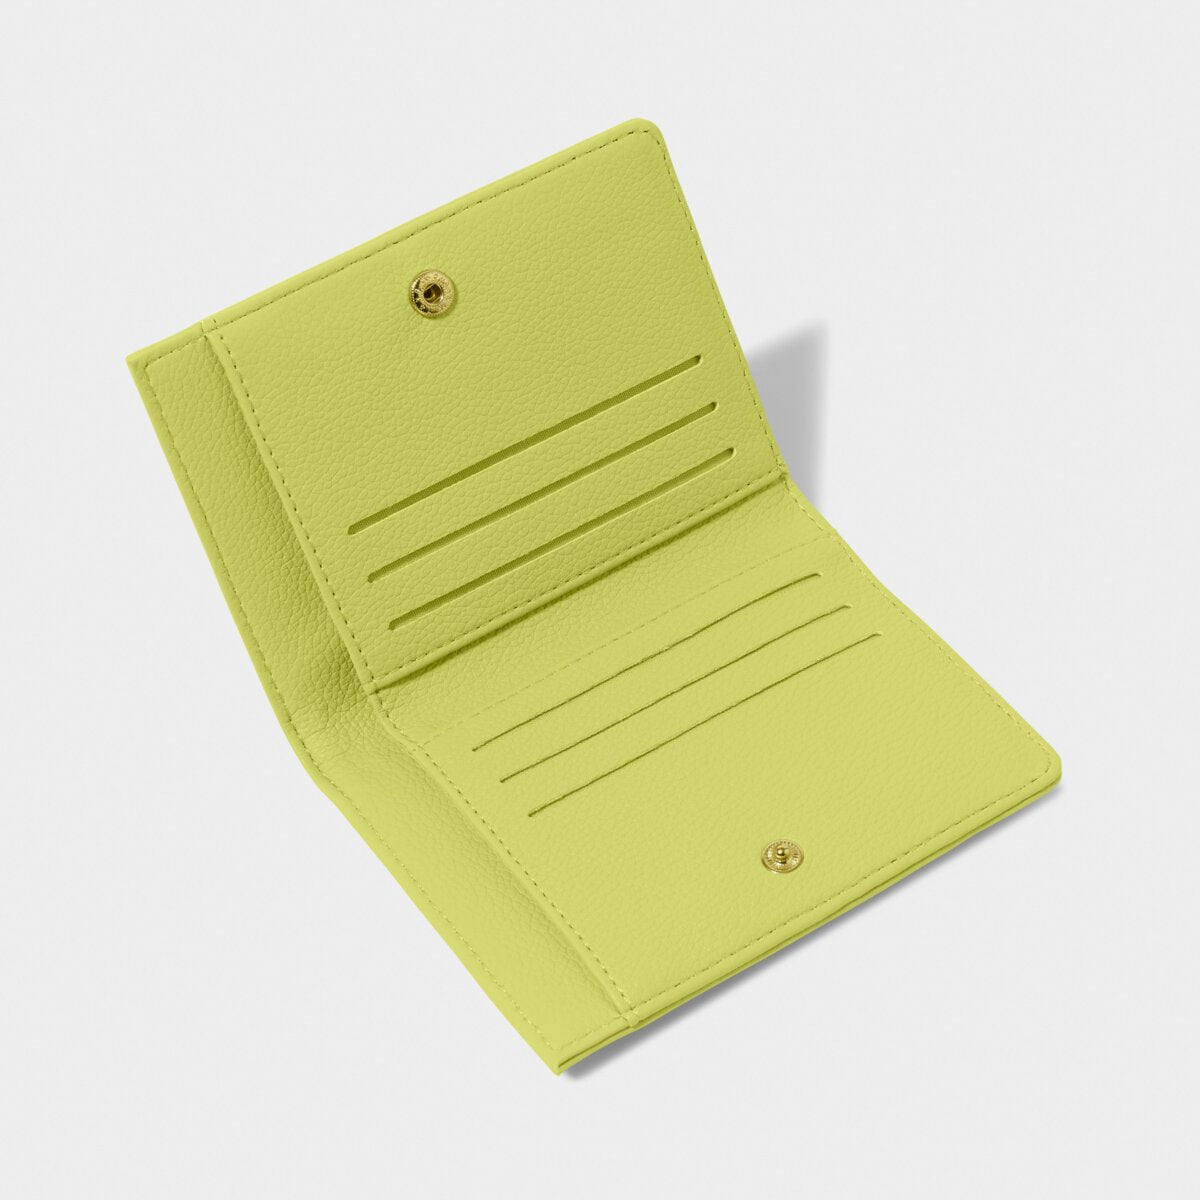 Picture of the inside of the Katie Loxton Jayde purse in lime green. It has six card slots and a section for cash notes. It has a gold popper fastener.